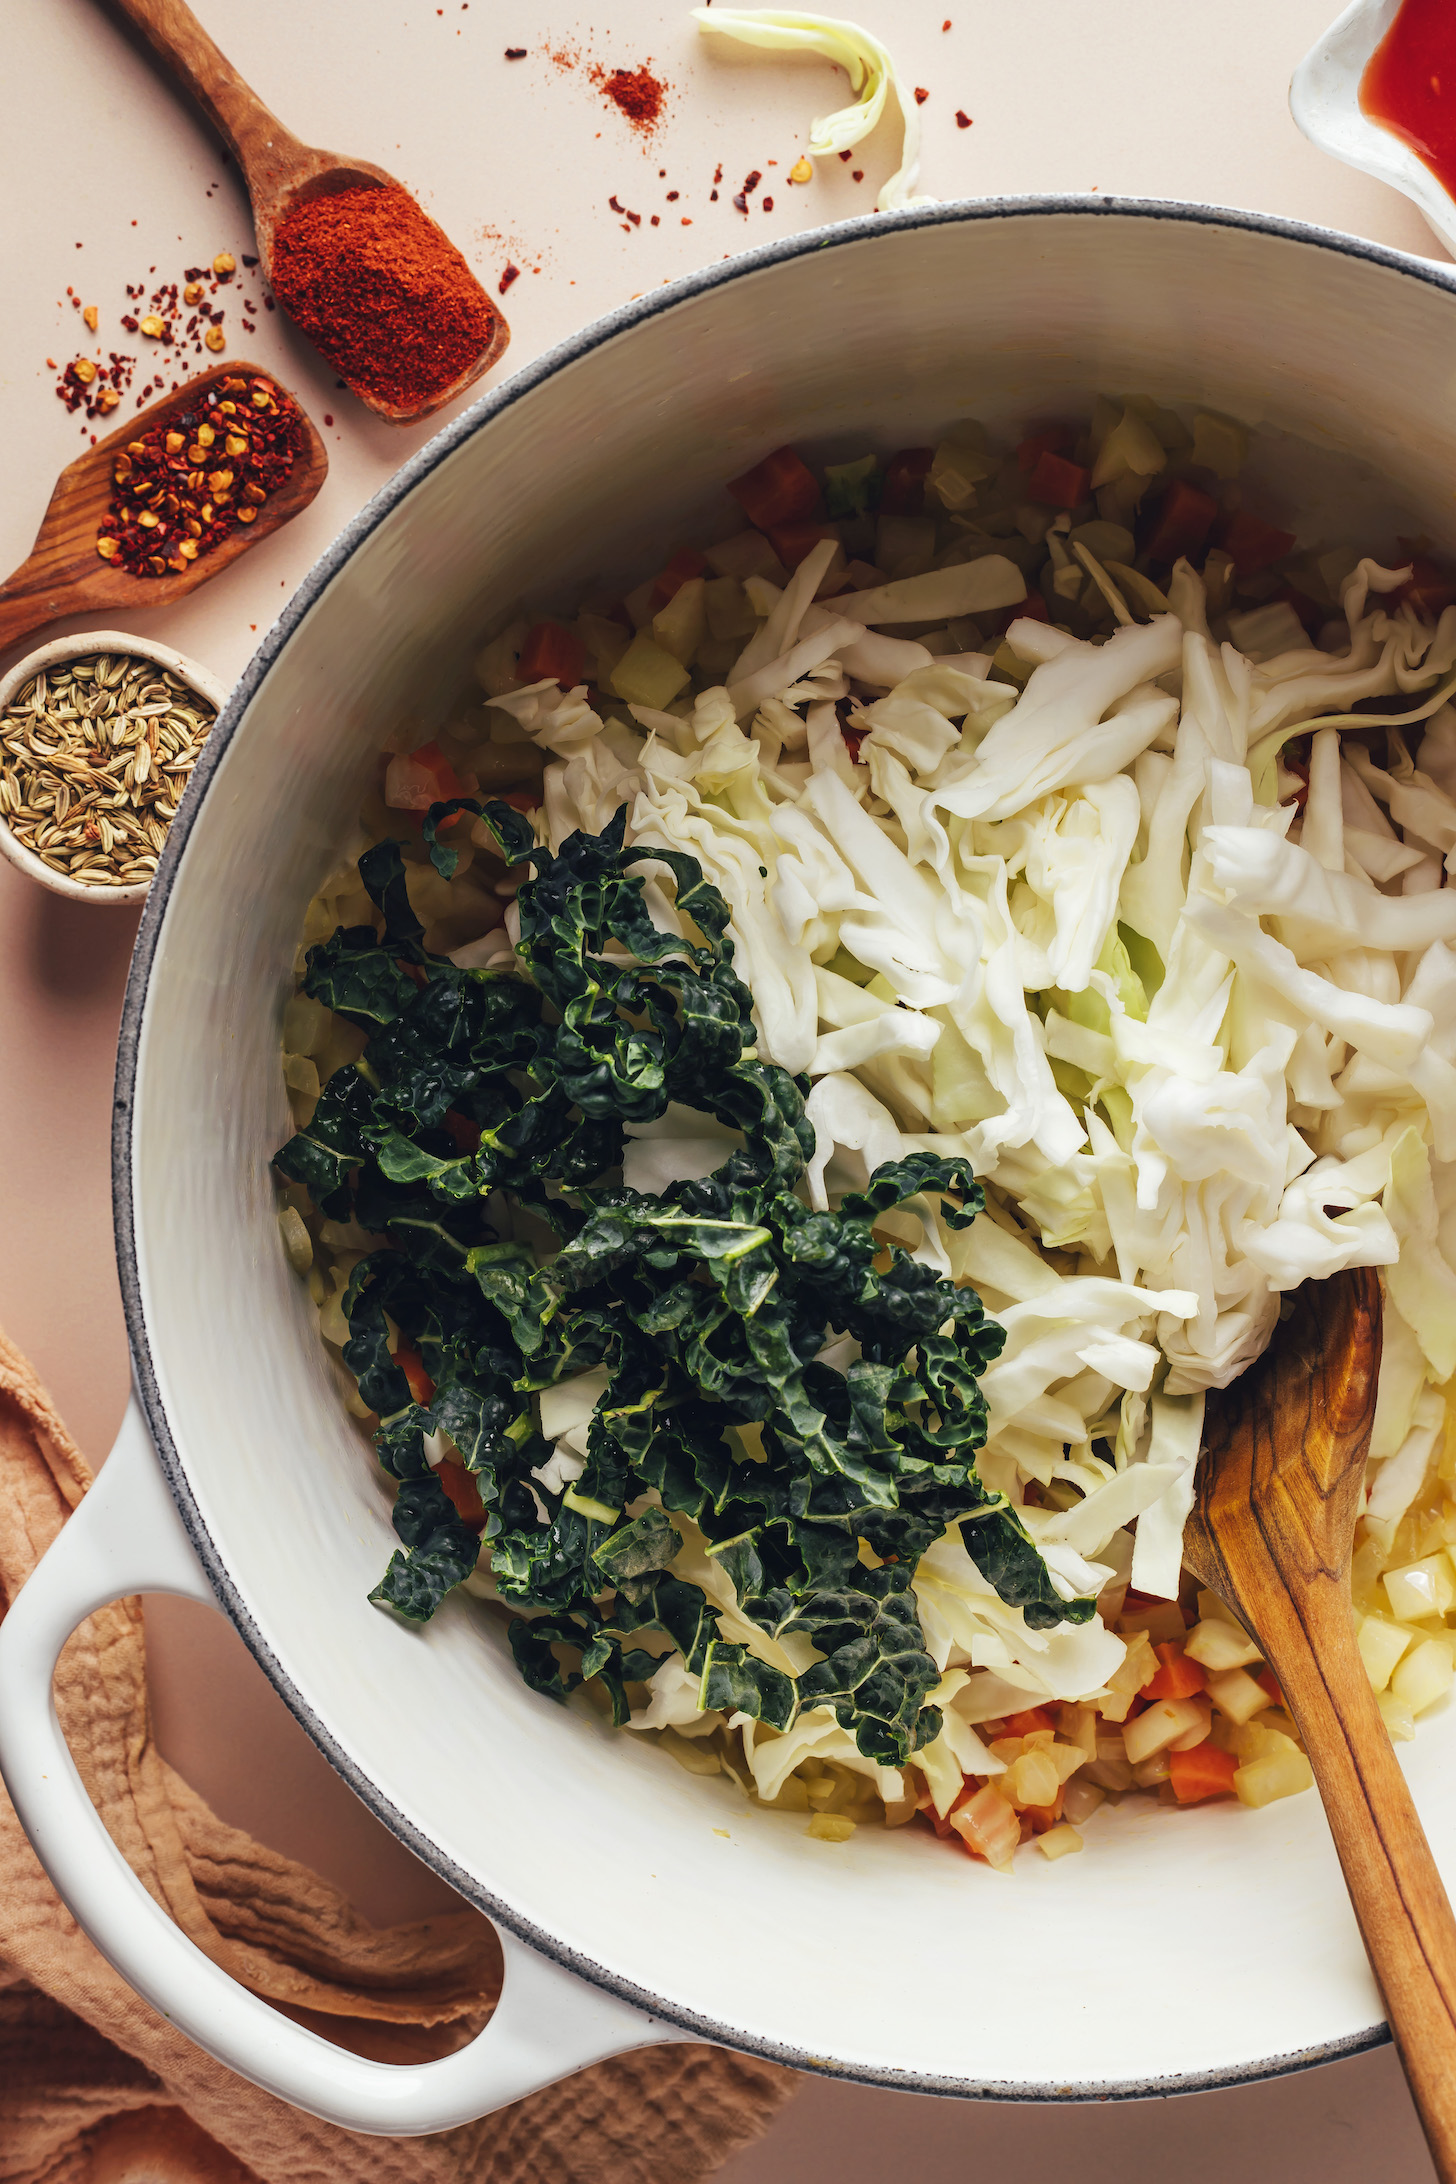 Top the roasted vegetables with shredded kale and cabbage